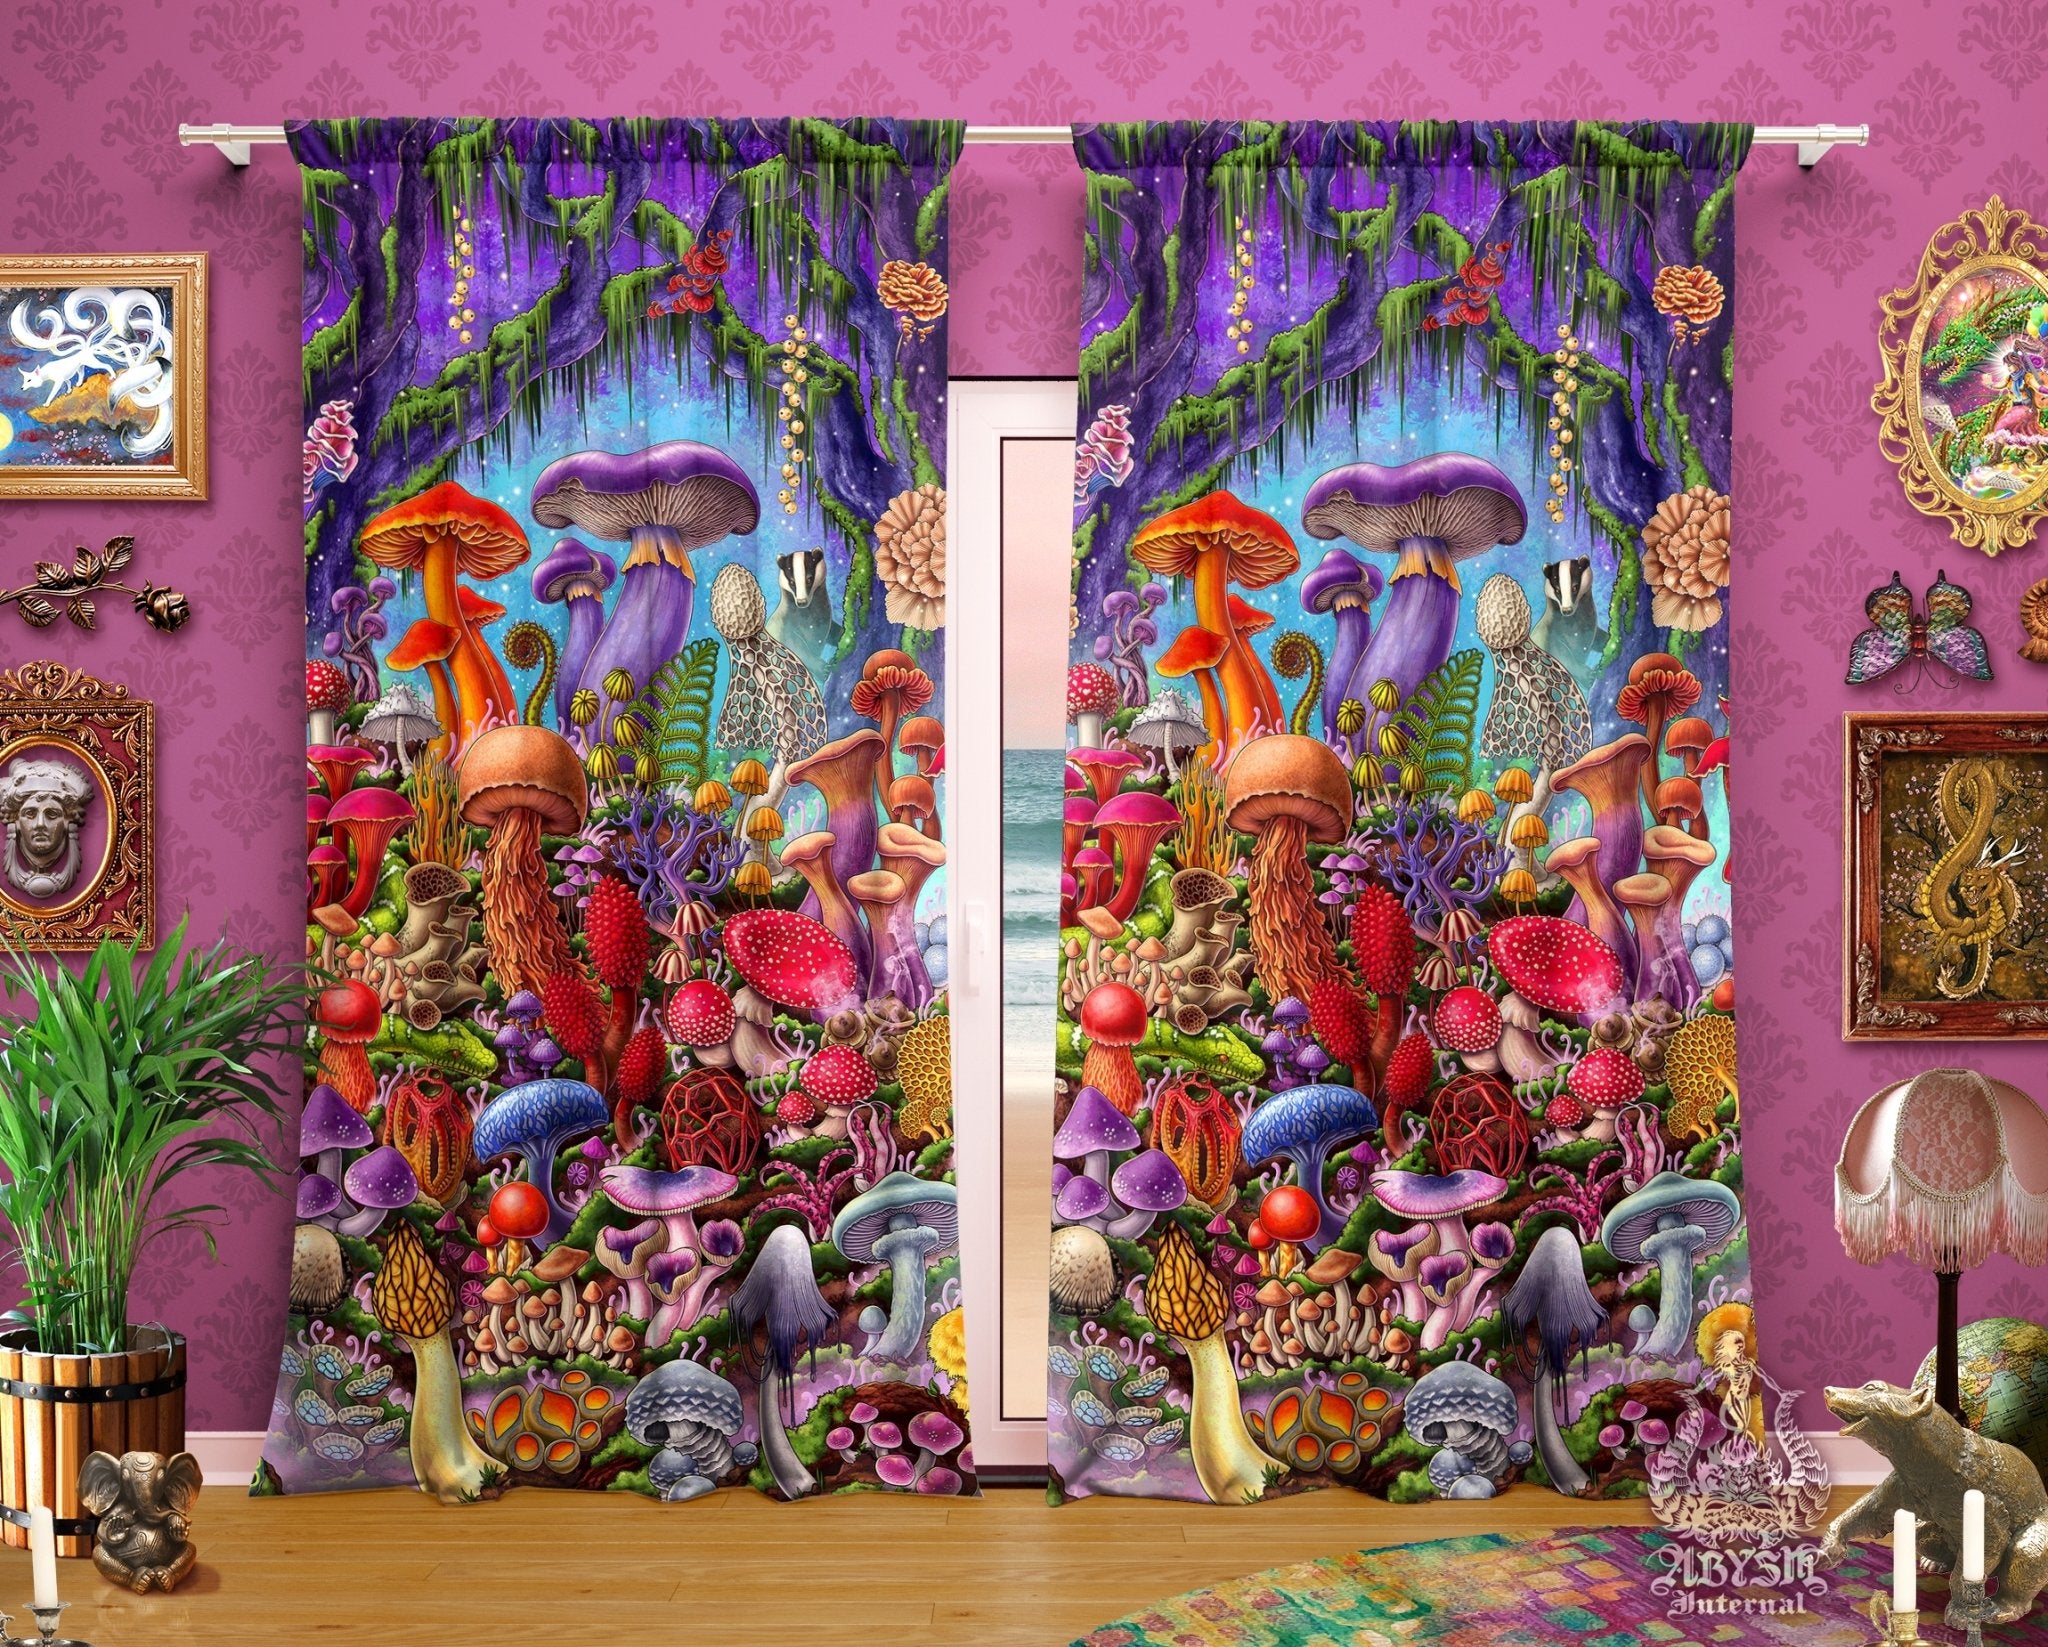 Mushrooms Blackout Curtains, Long Window Panels, Micology Art Print, Indie Shop, Home and Room Decor - Magic Shrooms, Original - Abysm Internal